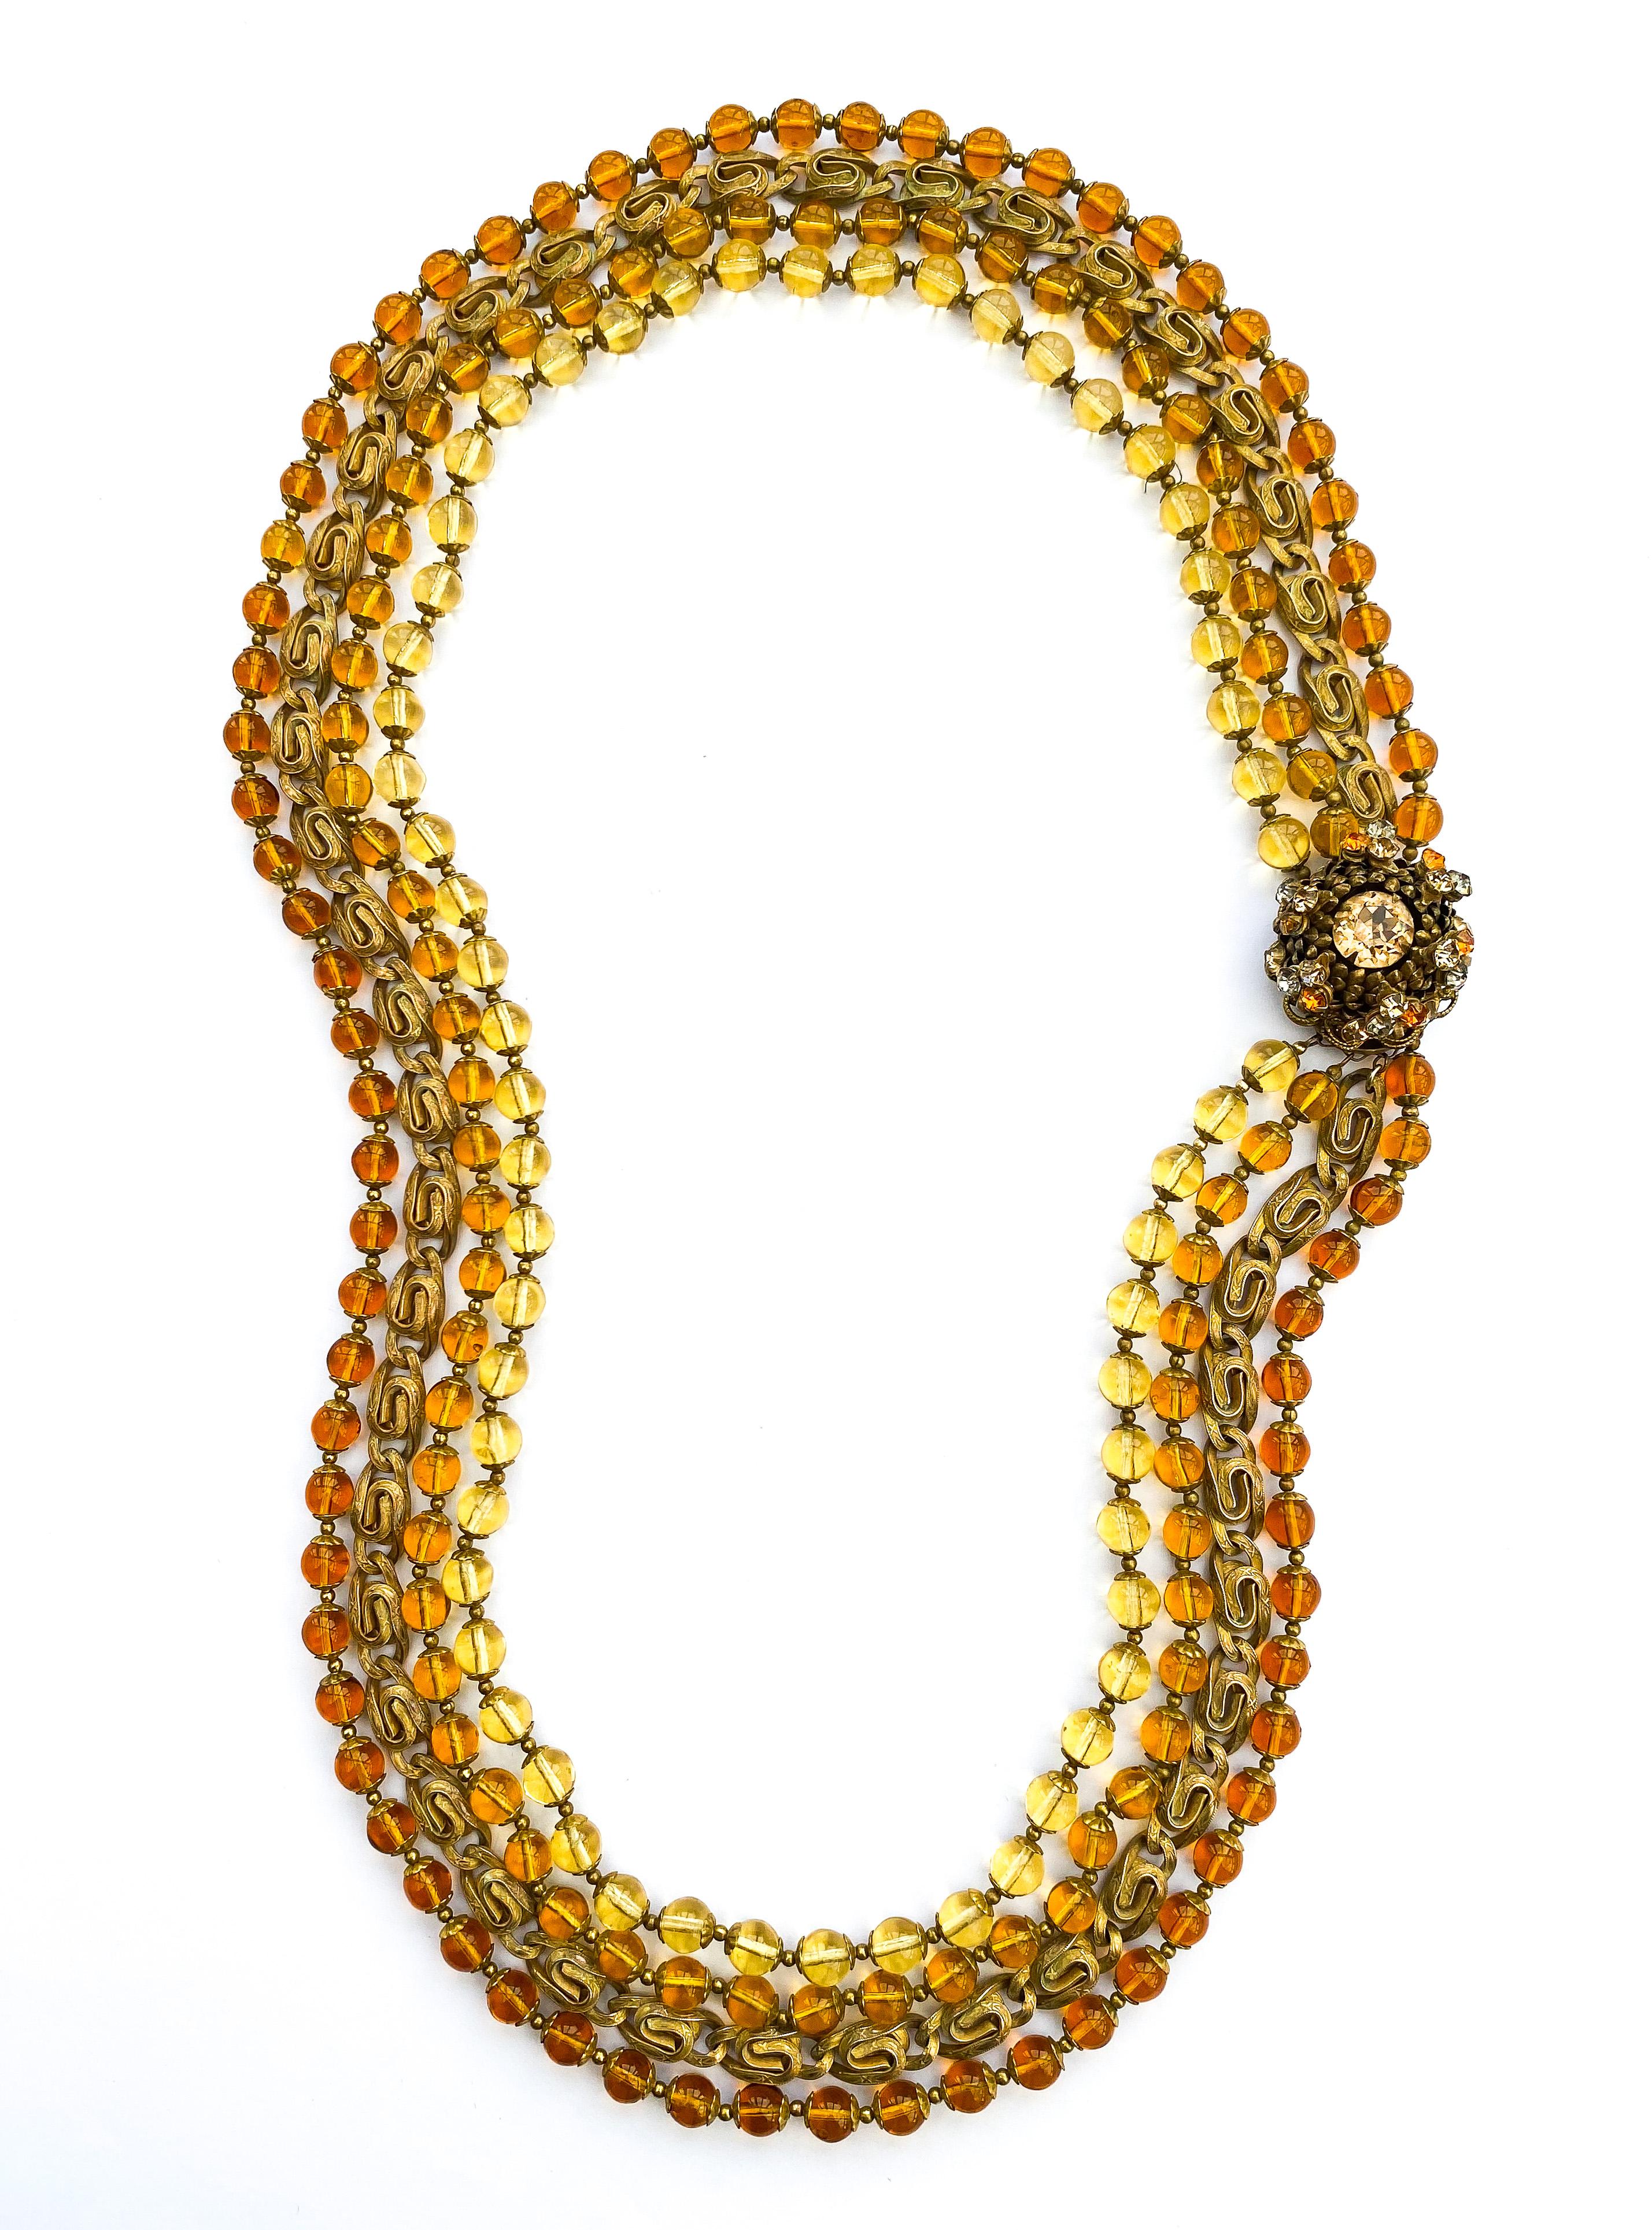 A large multi row necklace of topaz glass beads, Miriam Haskell, USA, 1960s For Sale 2